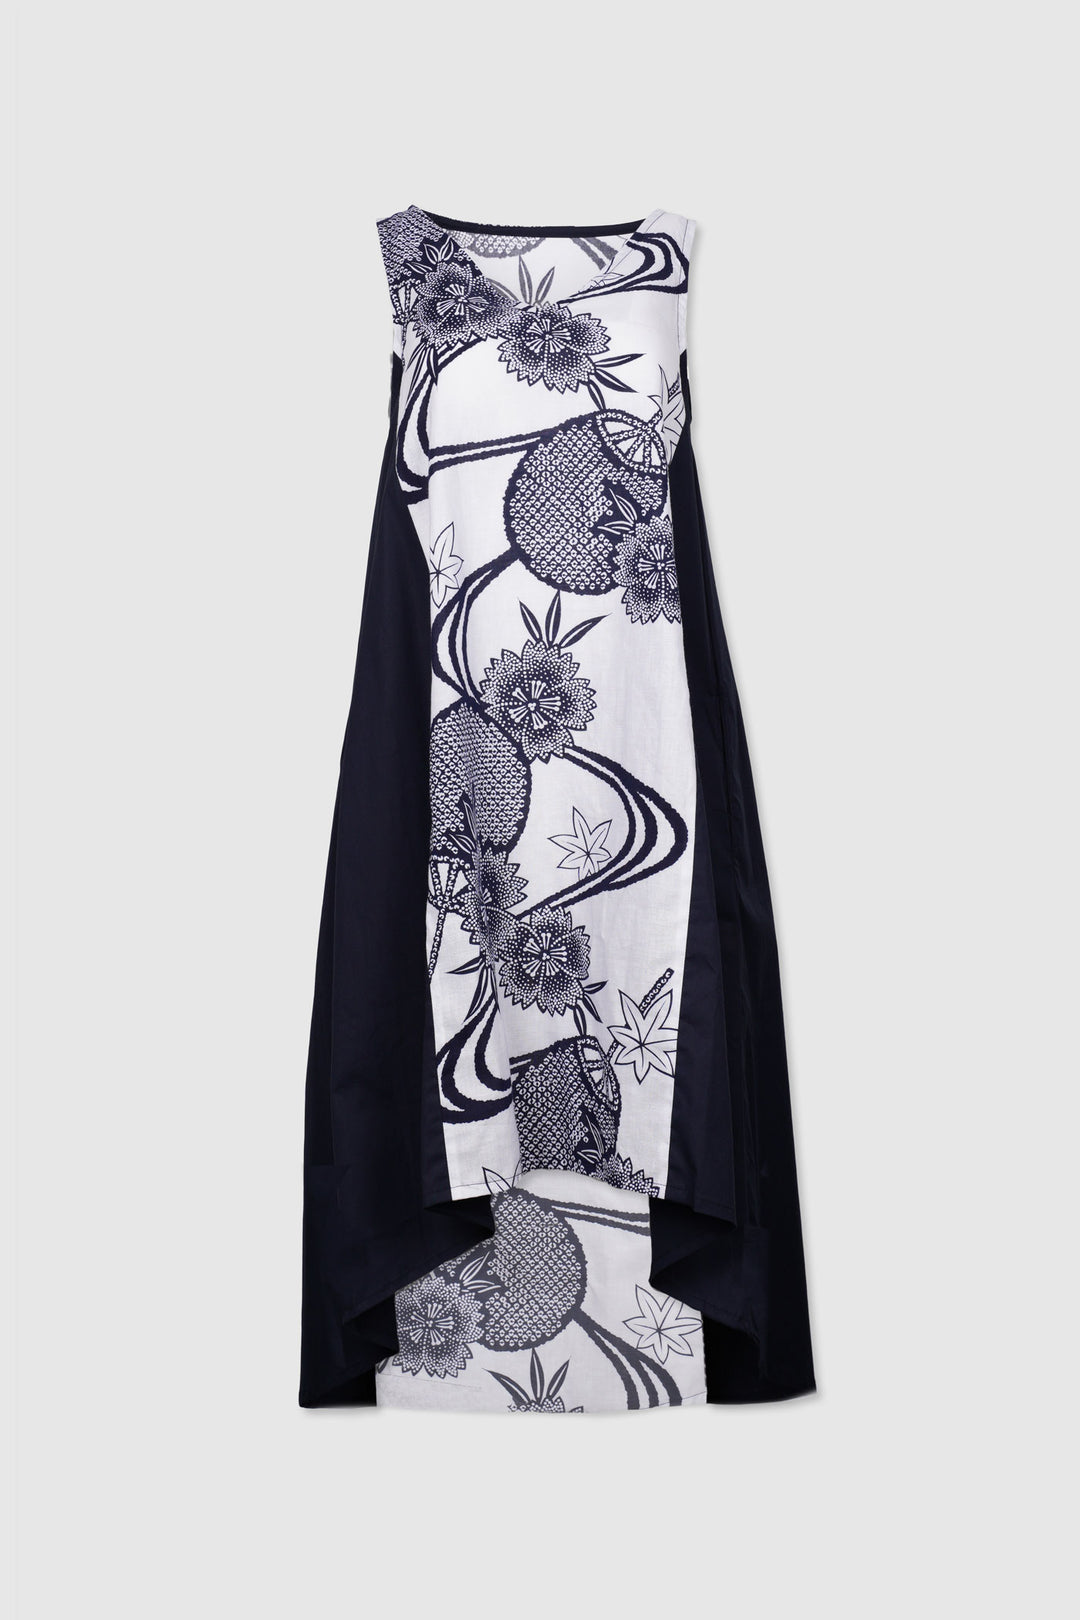 Sleeveless A-Line Cotton Dress with Floral Panels | Mila